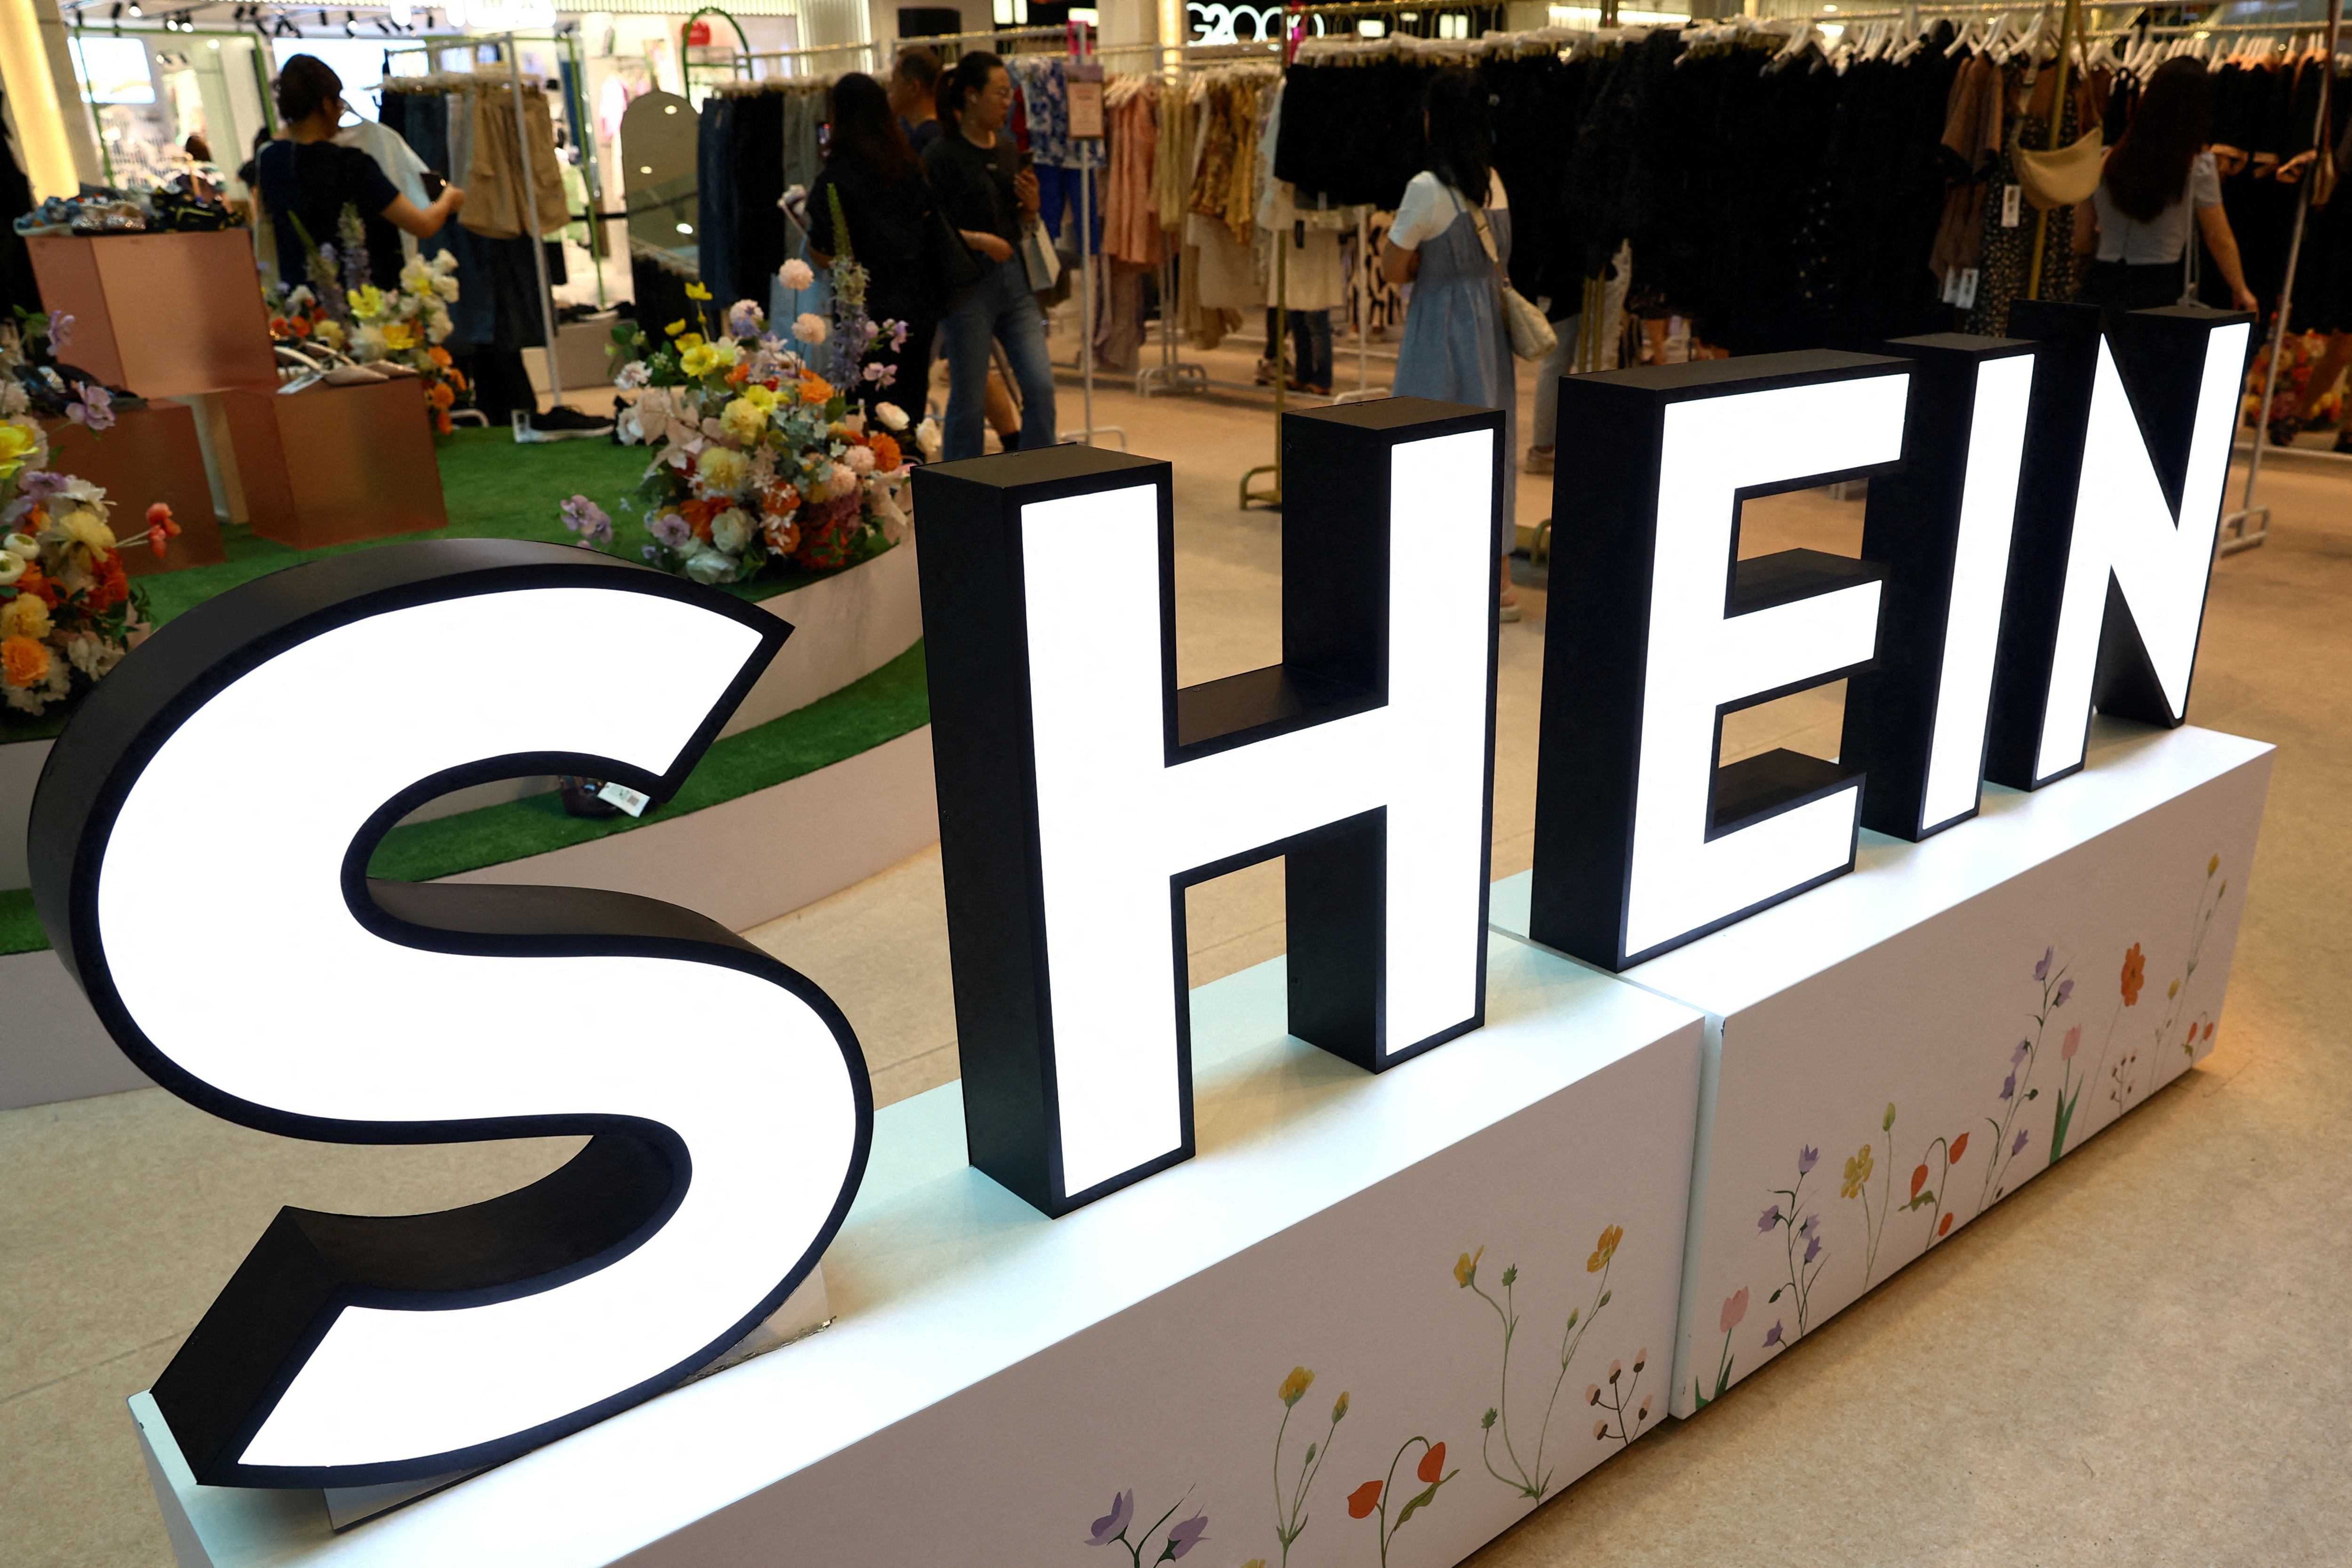 A view of a Shein pop-up store at a mall in Singapore